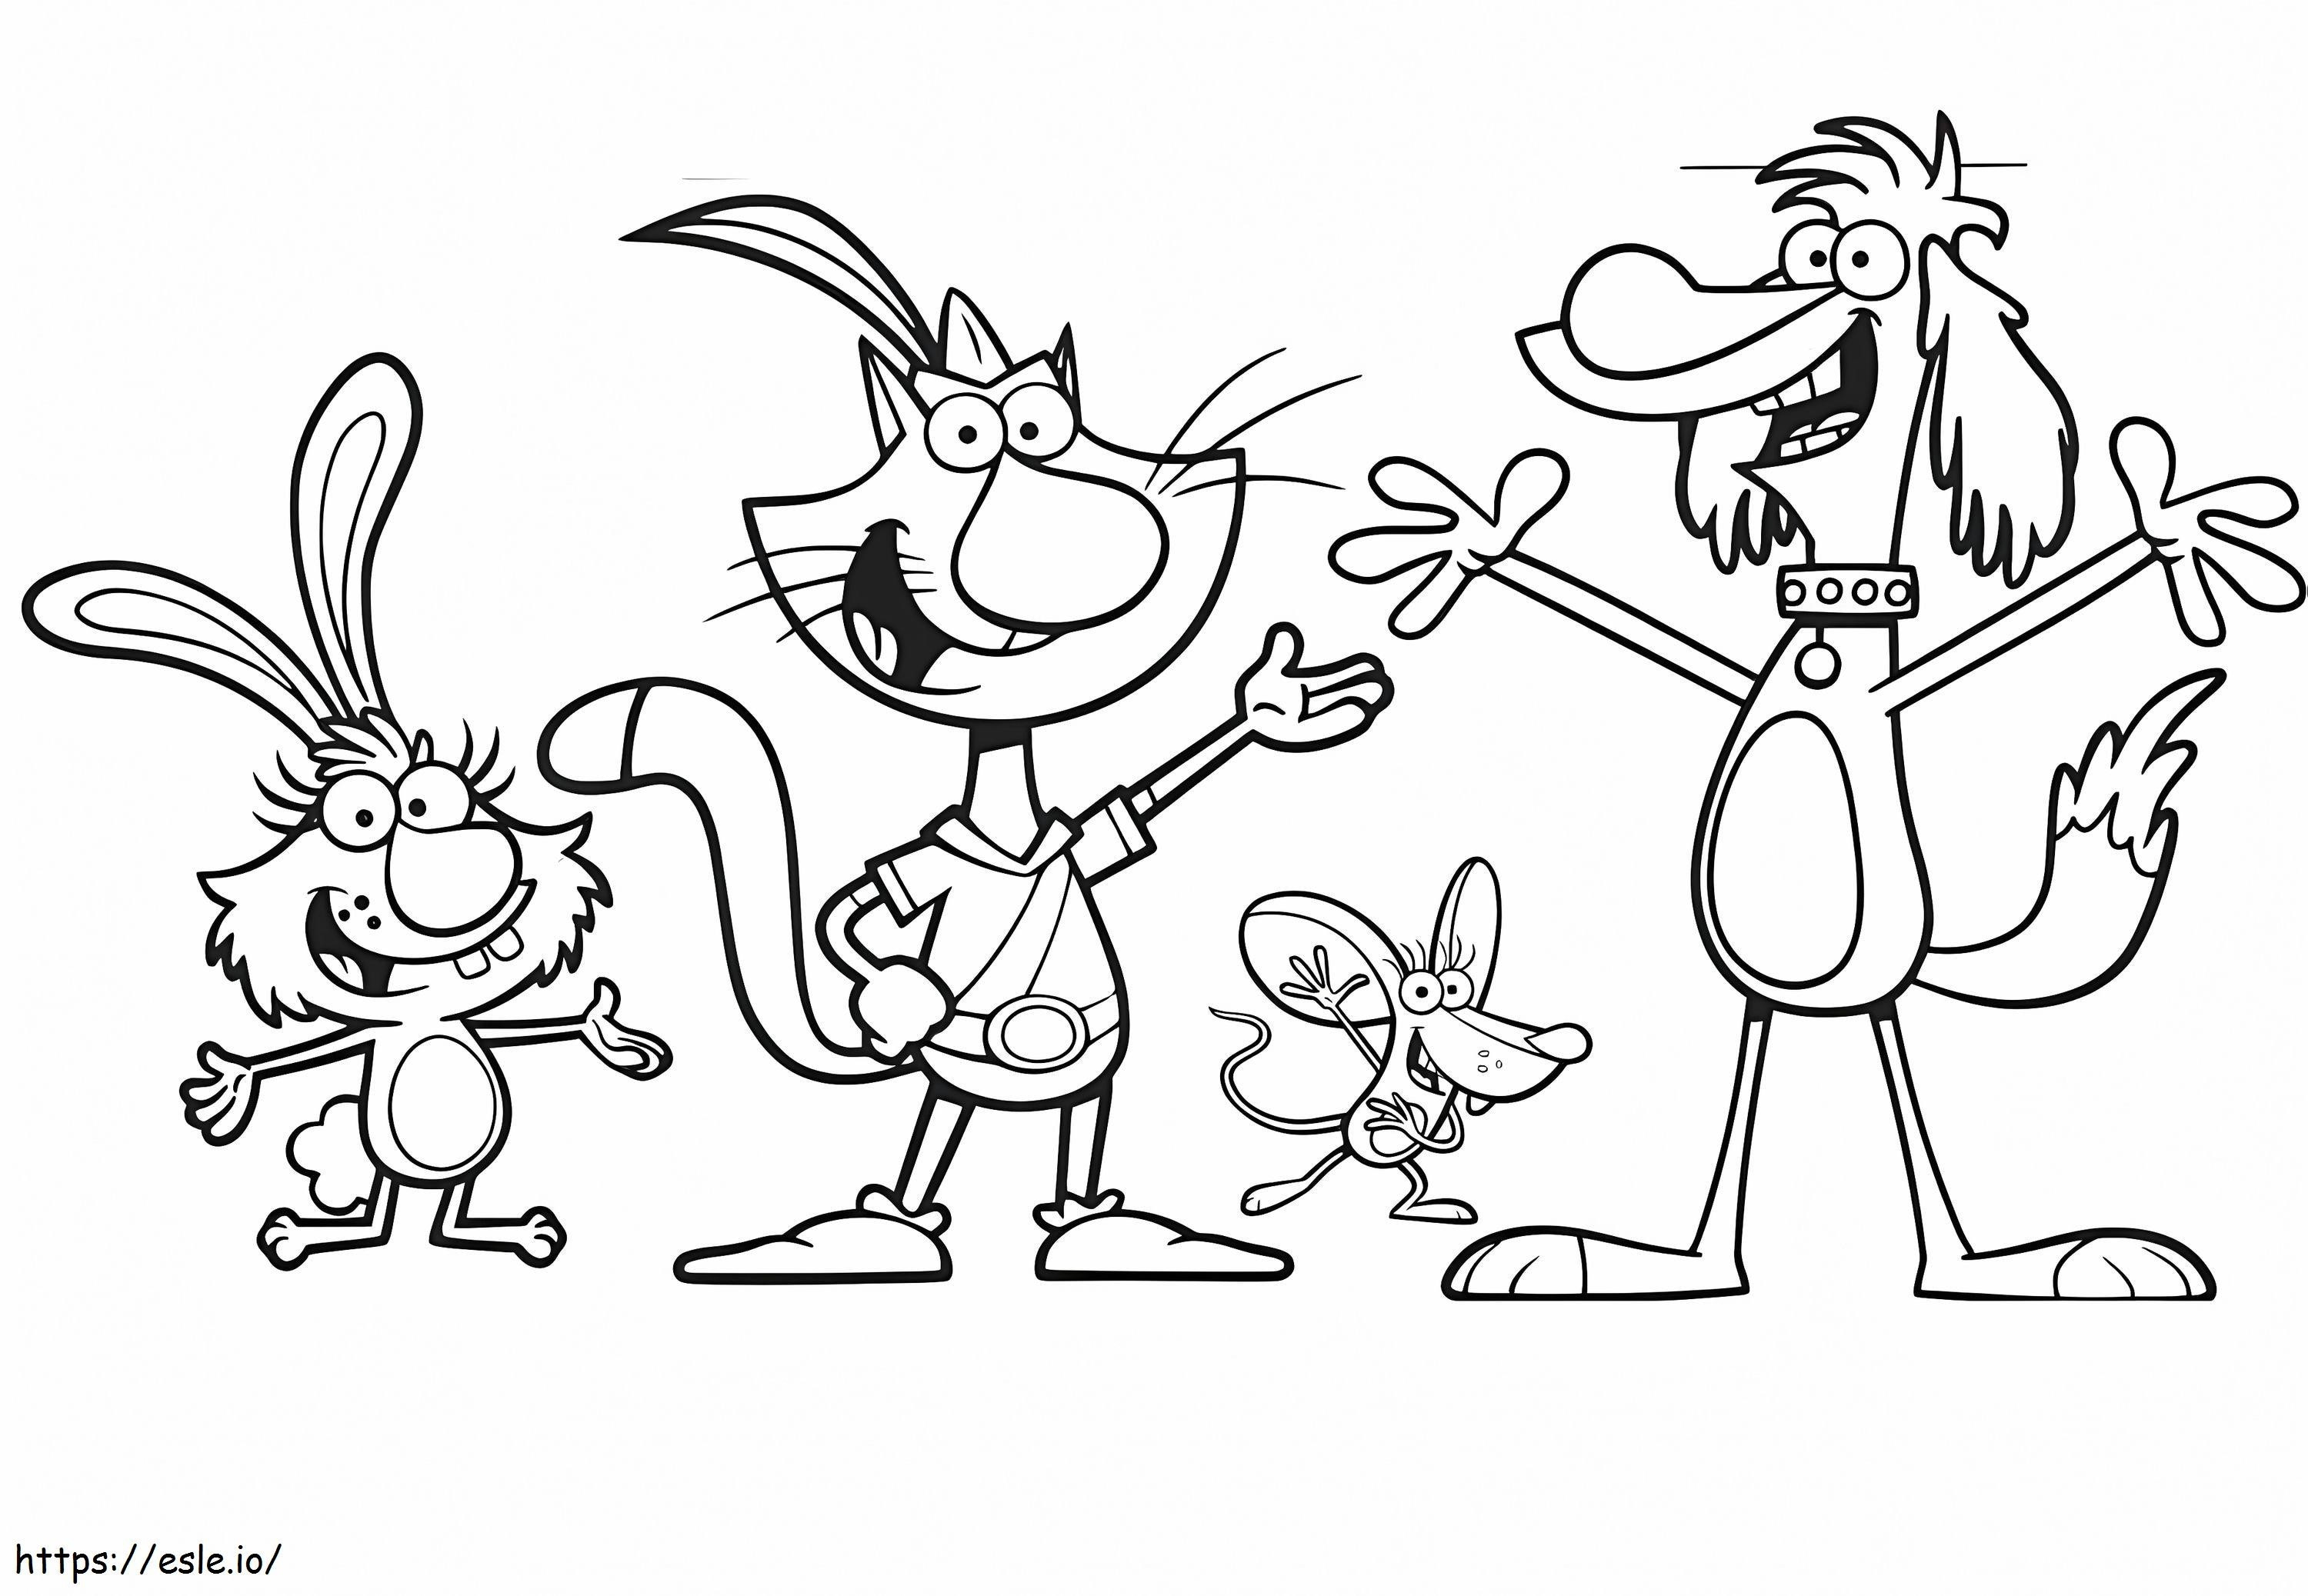 Nature Cats Characters coloring page